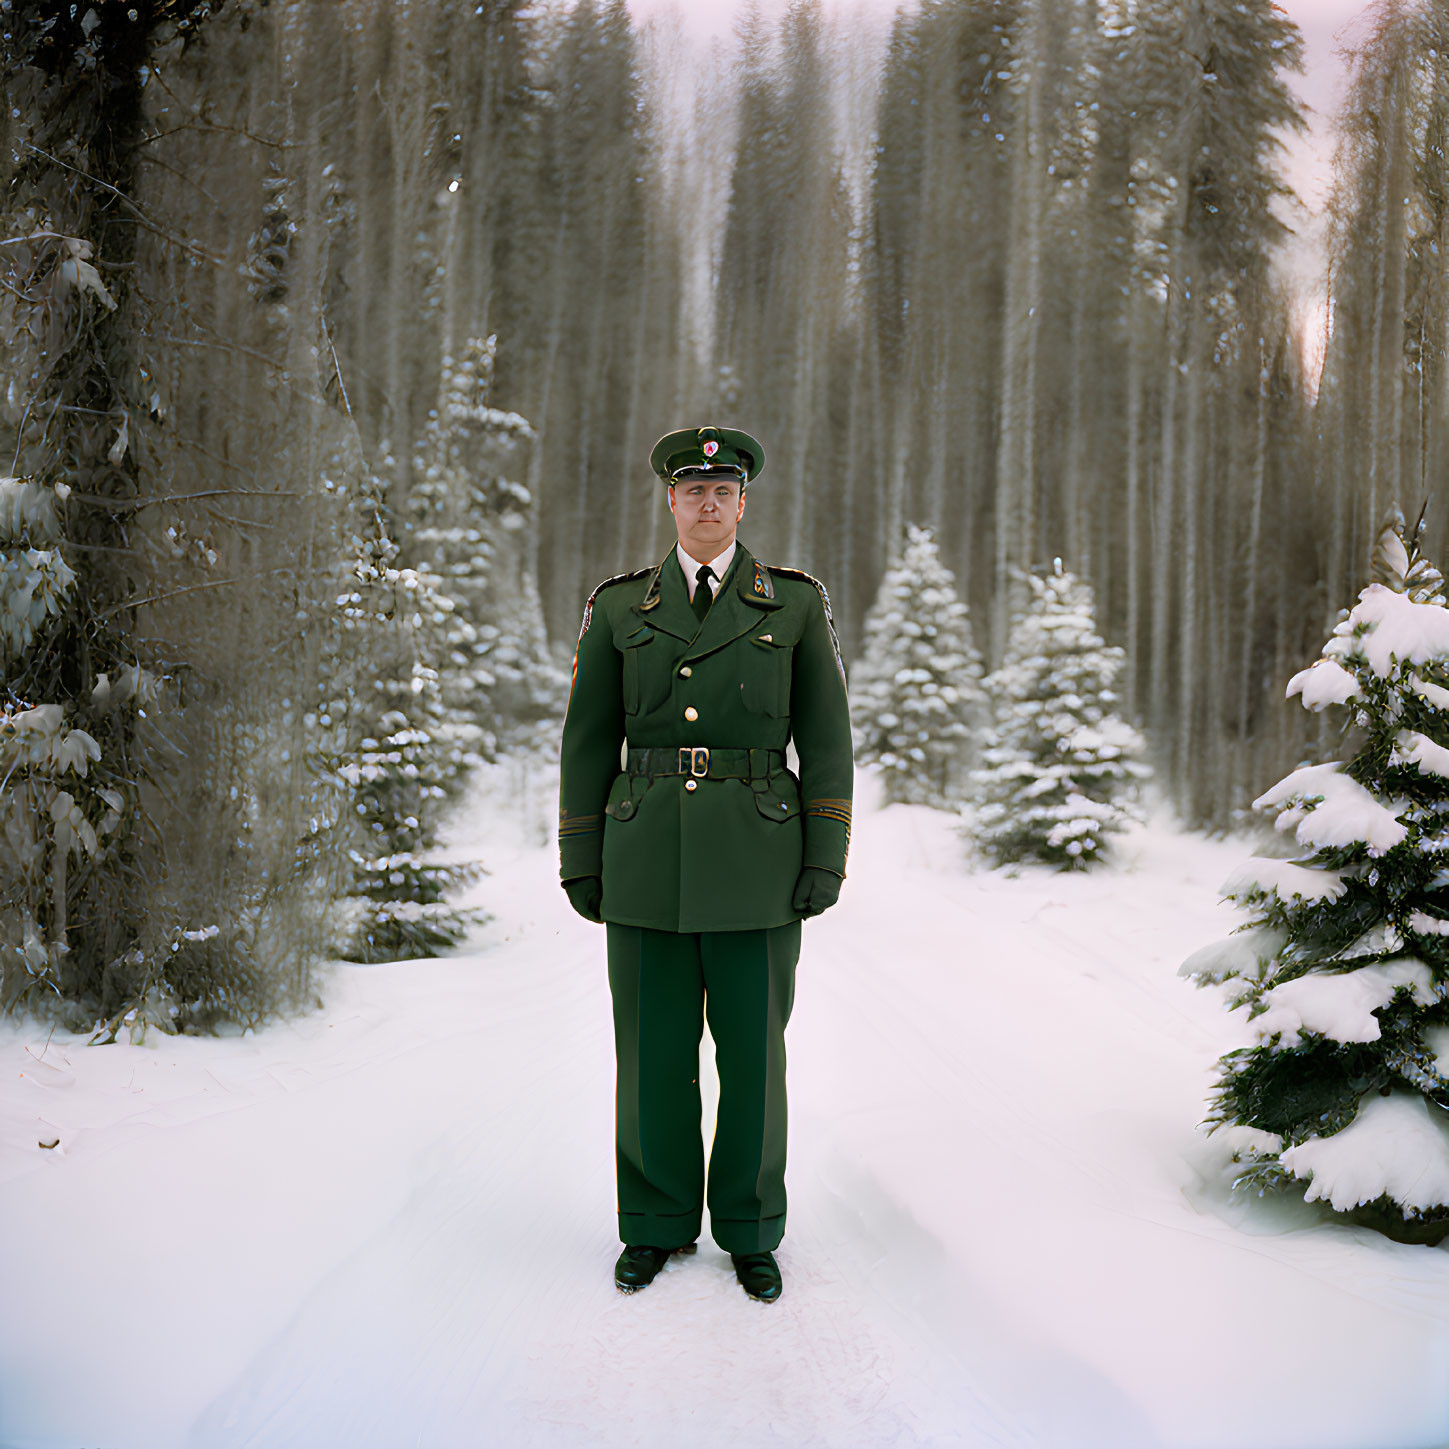 Person in Green Uniform on Snow-Covered Path with Trees